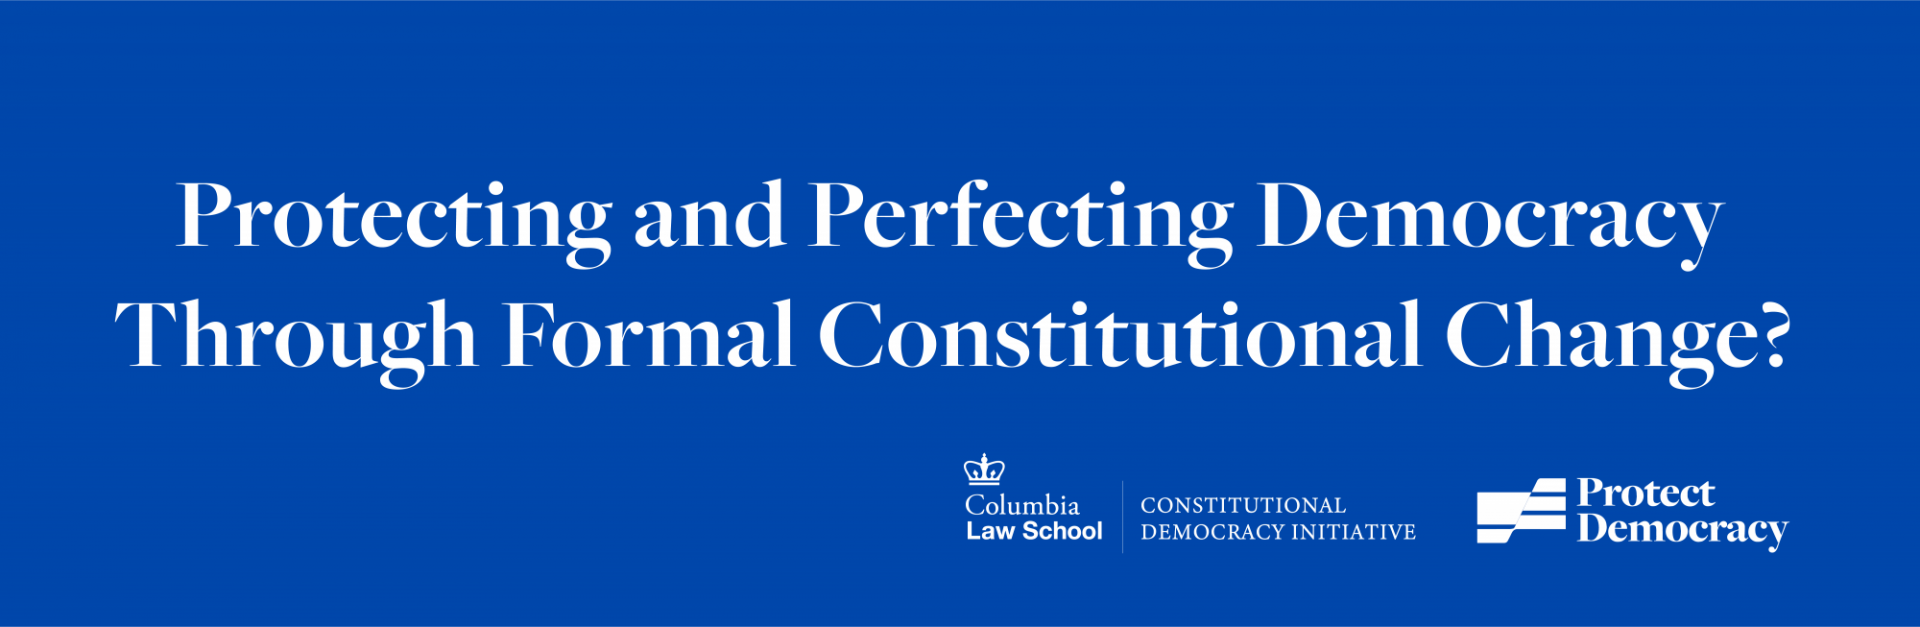 Protecting and Perfecting Democracy Through Formal Constitutional Change? 